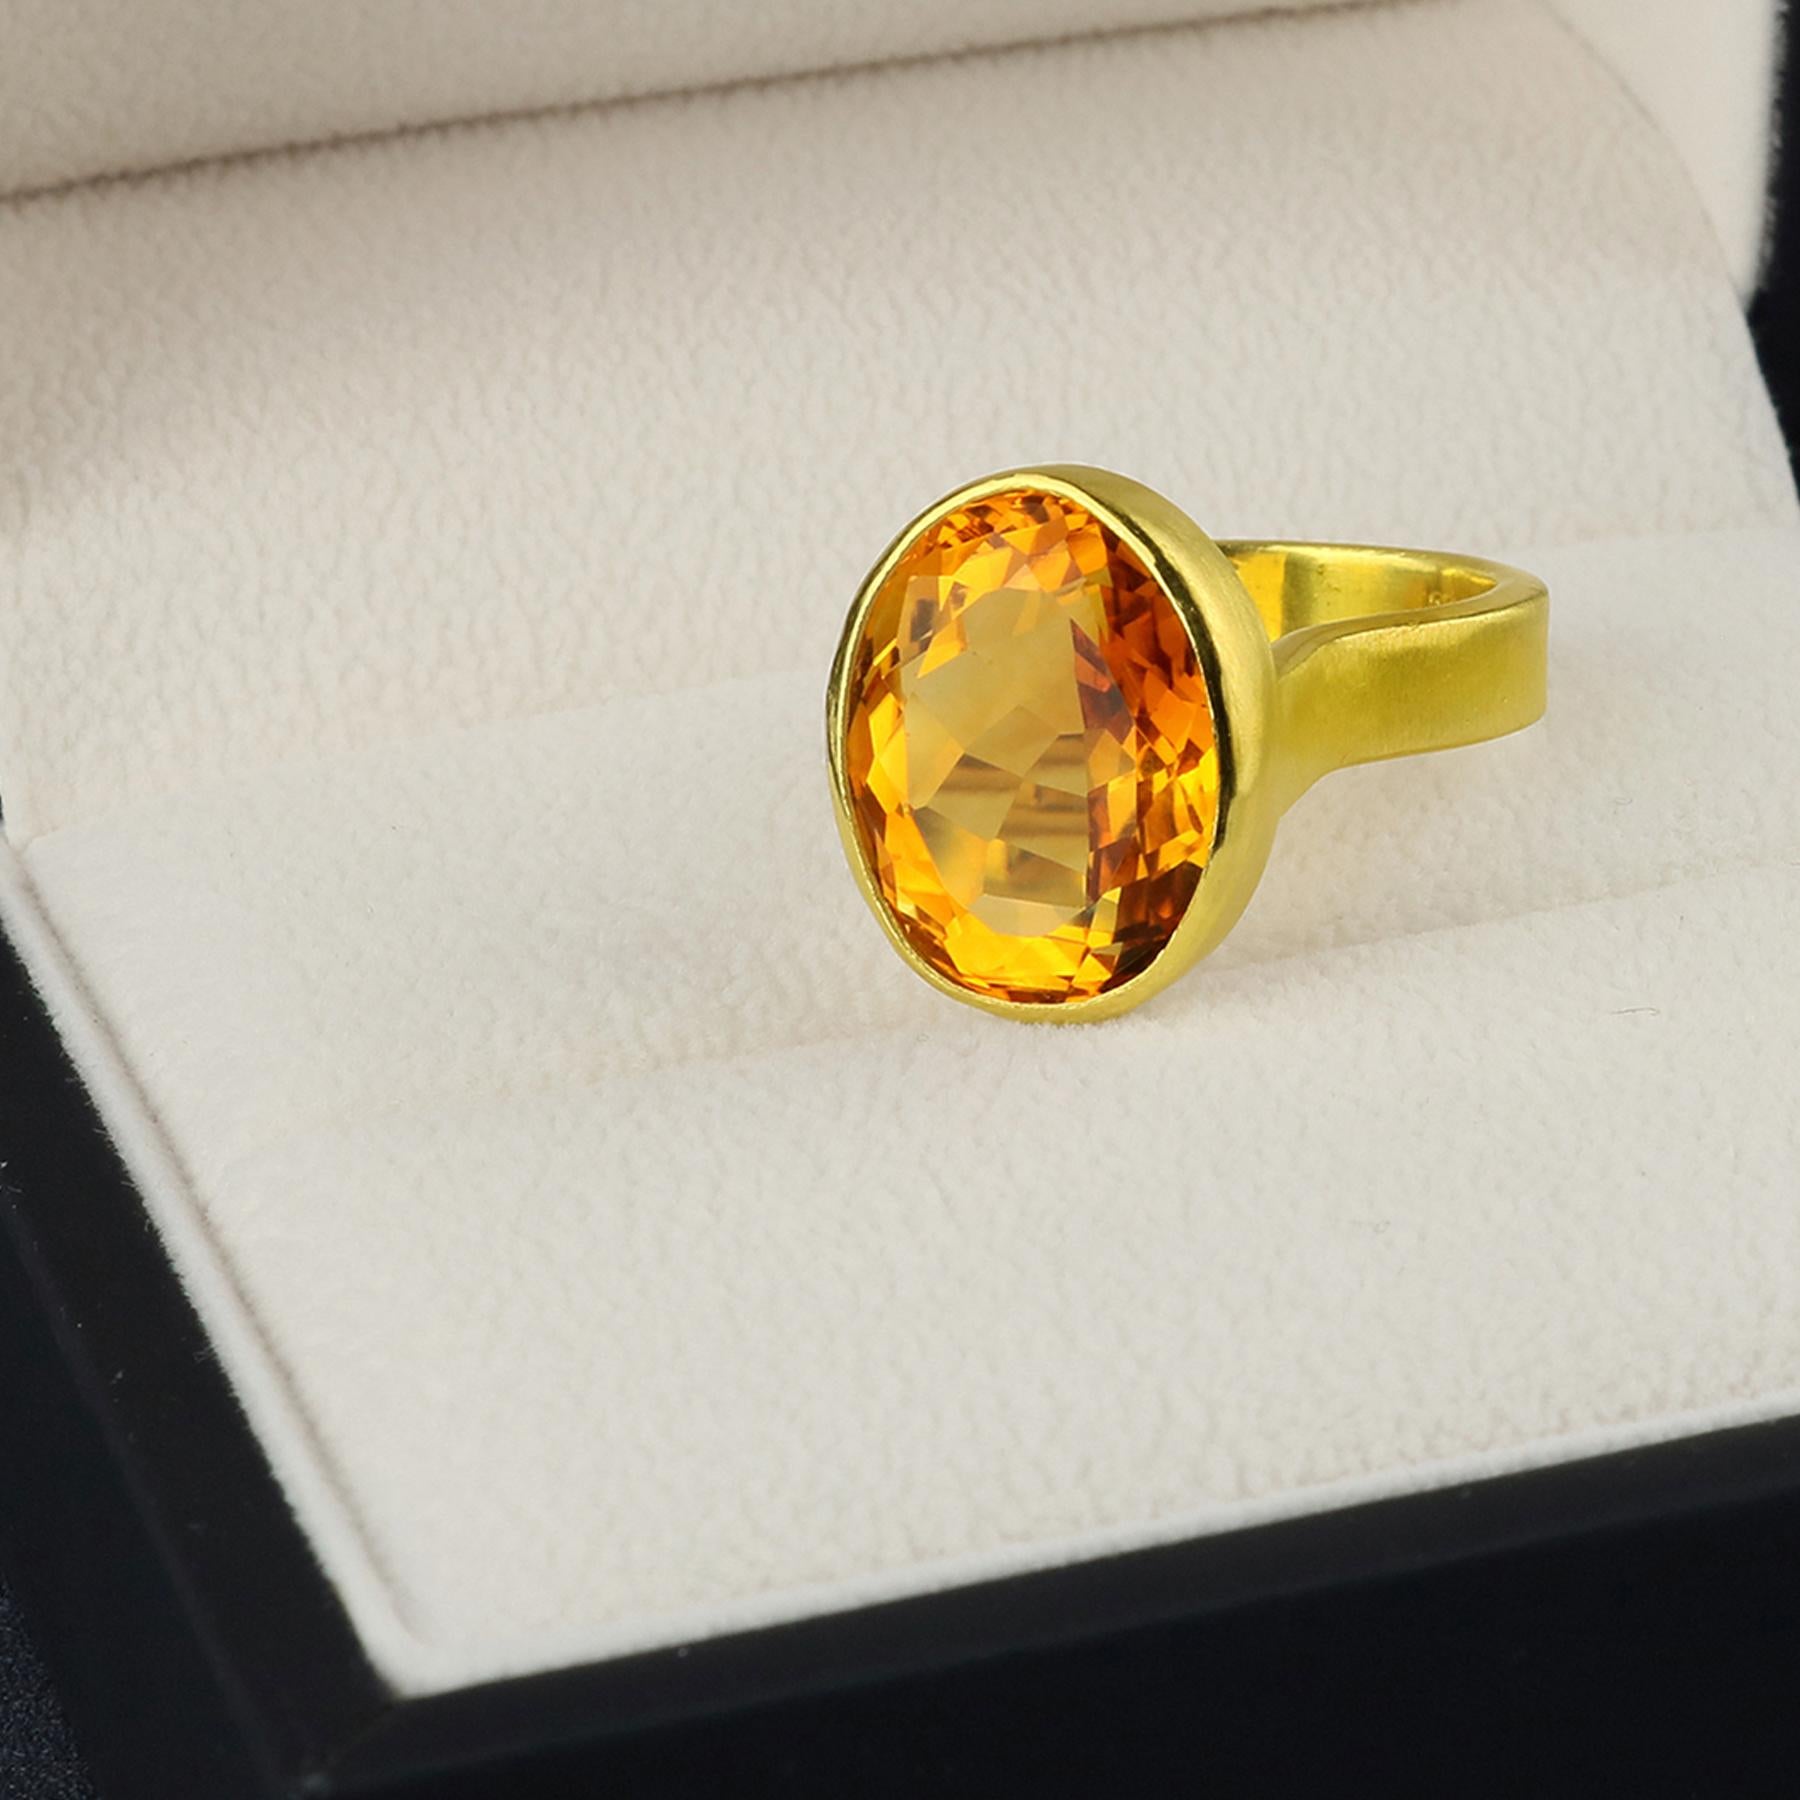 PHILIPPE SPENCER - 14.04 Ct. Faceted Oval Gold Citrine set in backless 22K Gold setting with Solid 20K Gold Hand & Anil Forged wide-band Statement Ring. Heavy Matte Brushed Exterior, Polished Interior Finish. Size 6 1/4 to 6 1/2, and is in-stock and